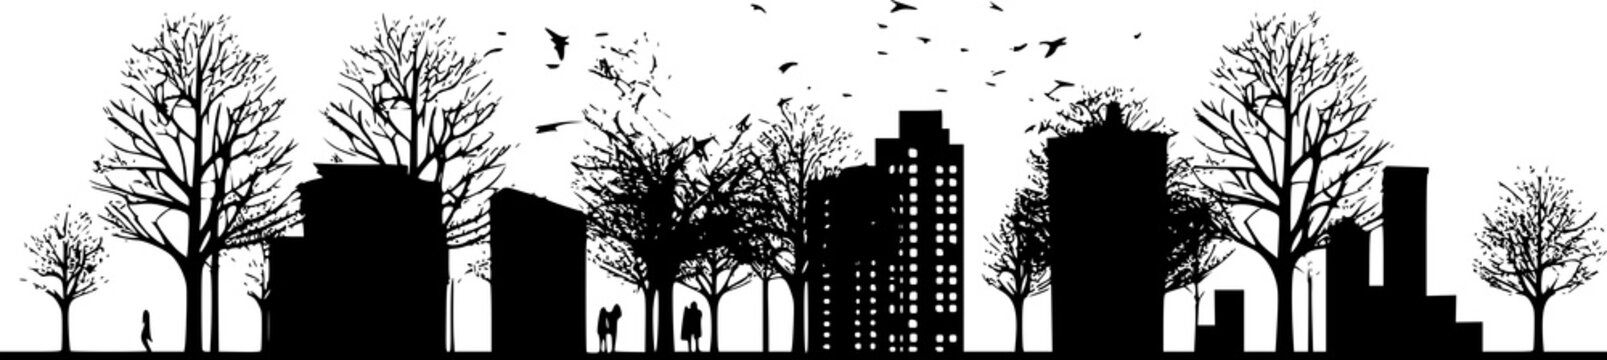 Unban cityscape with tree silhouette 